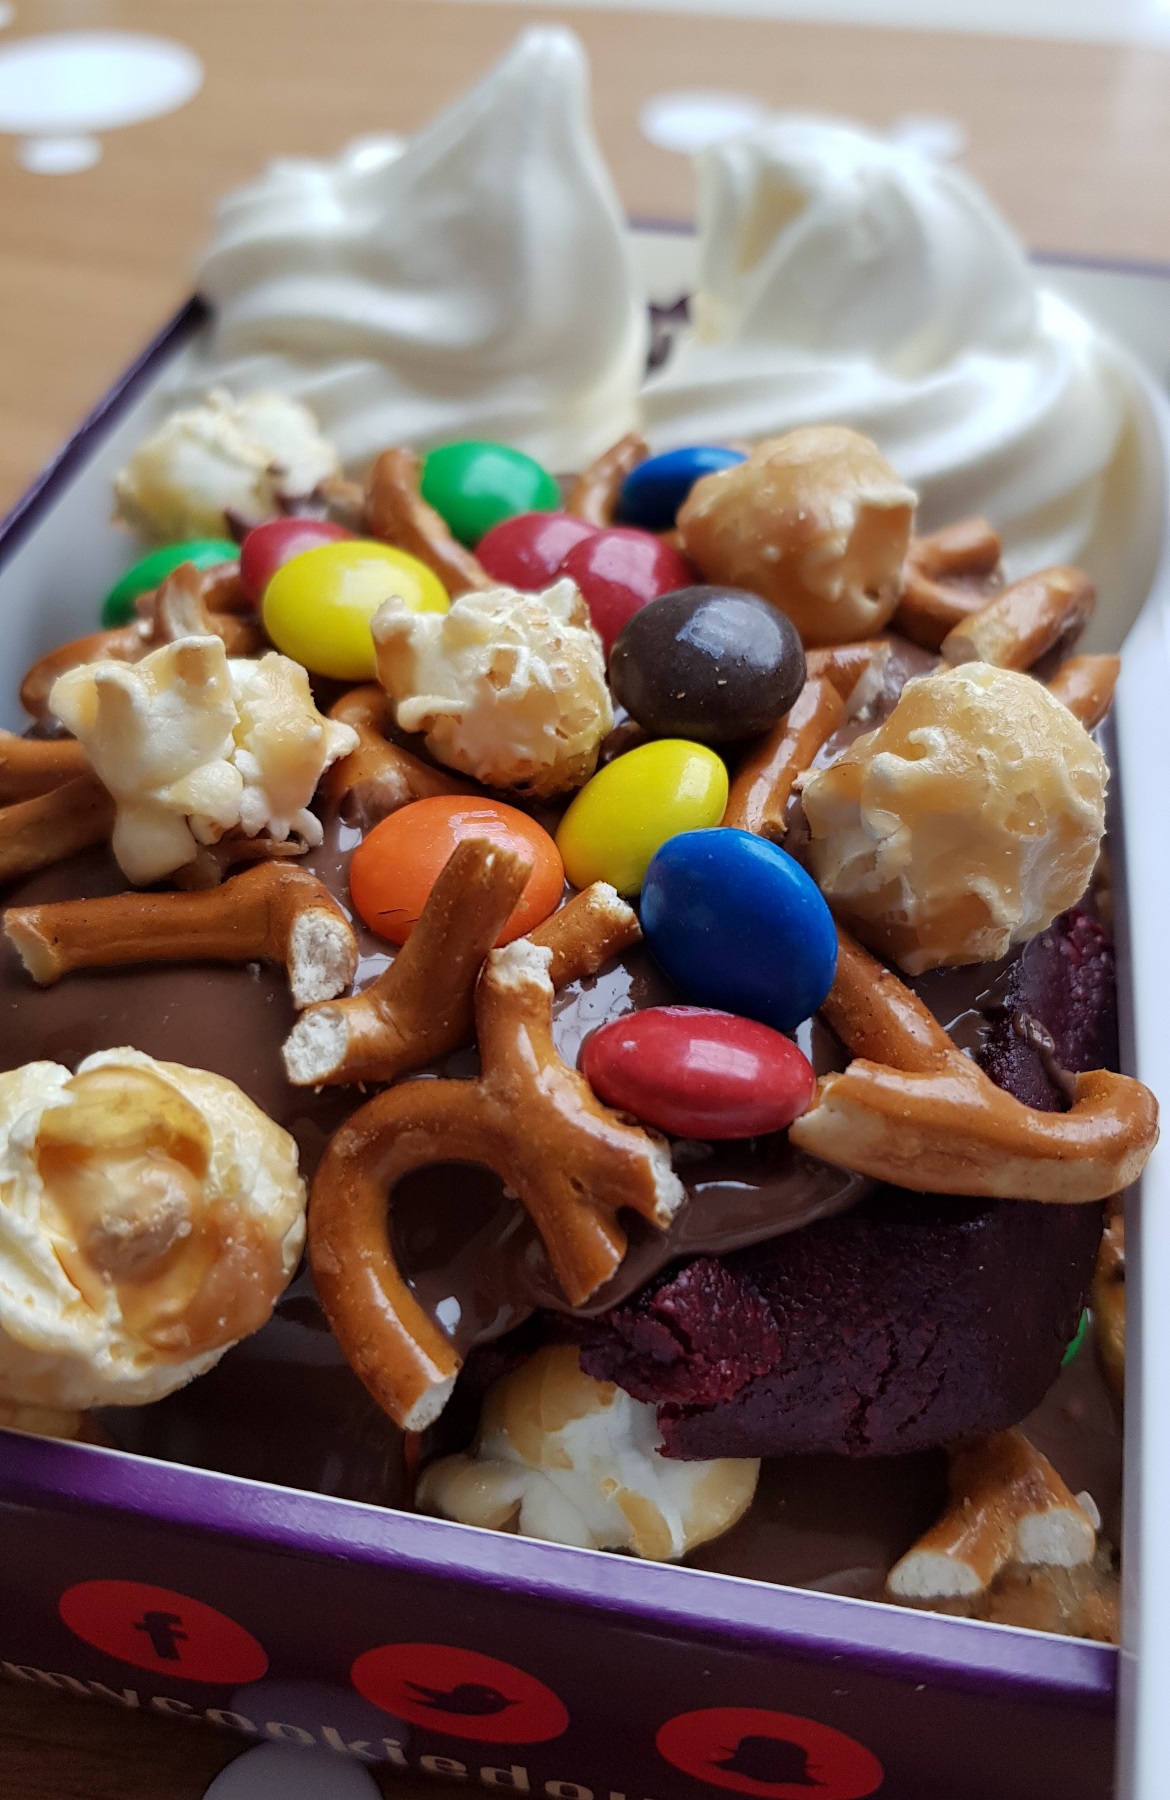 Movie Night at My Cookie Dough - Cheering Yourself up in Leeds by BeckyBecky Blogs